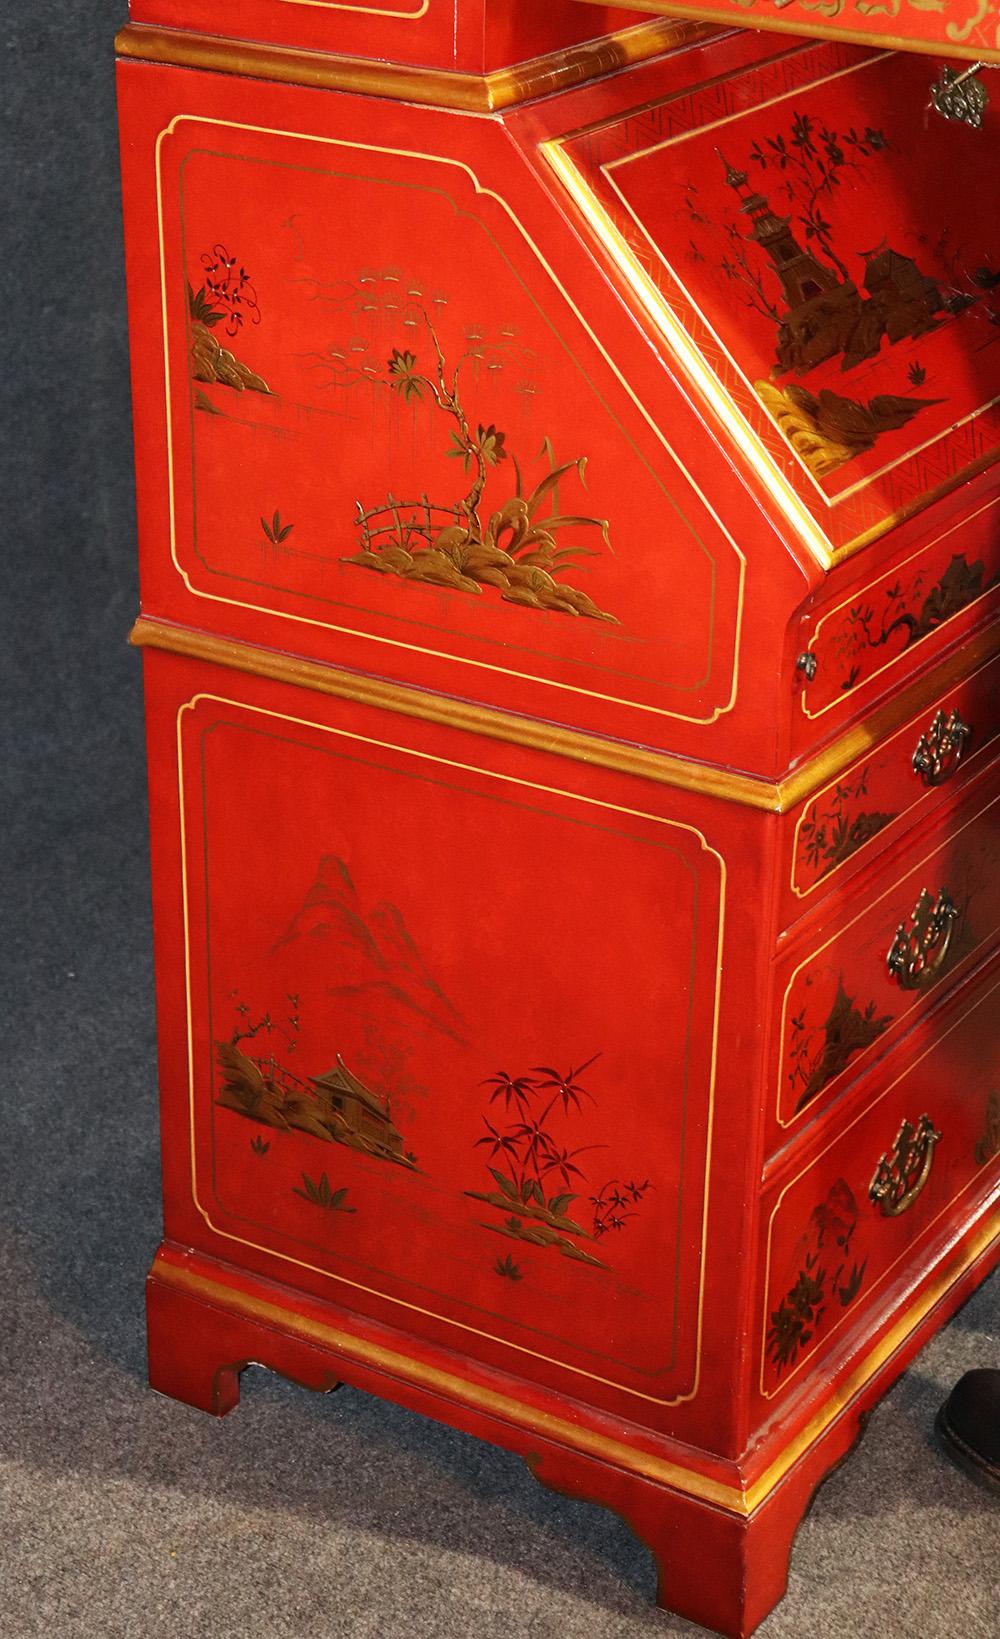 American Red Chinoiserie Japanned Painted Lacquer Tombstone Mirrored Secretary Desk